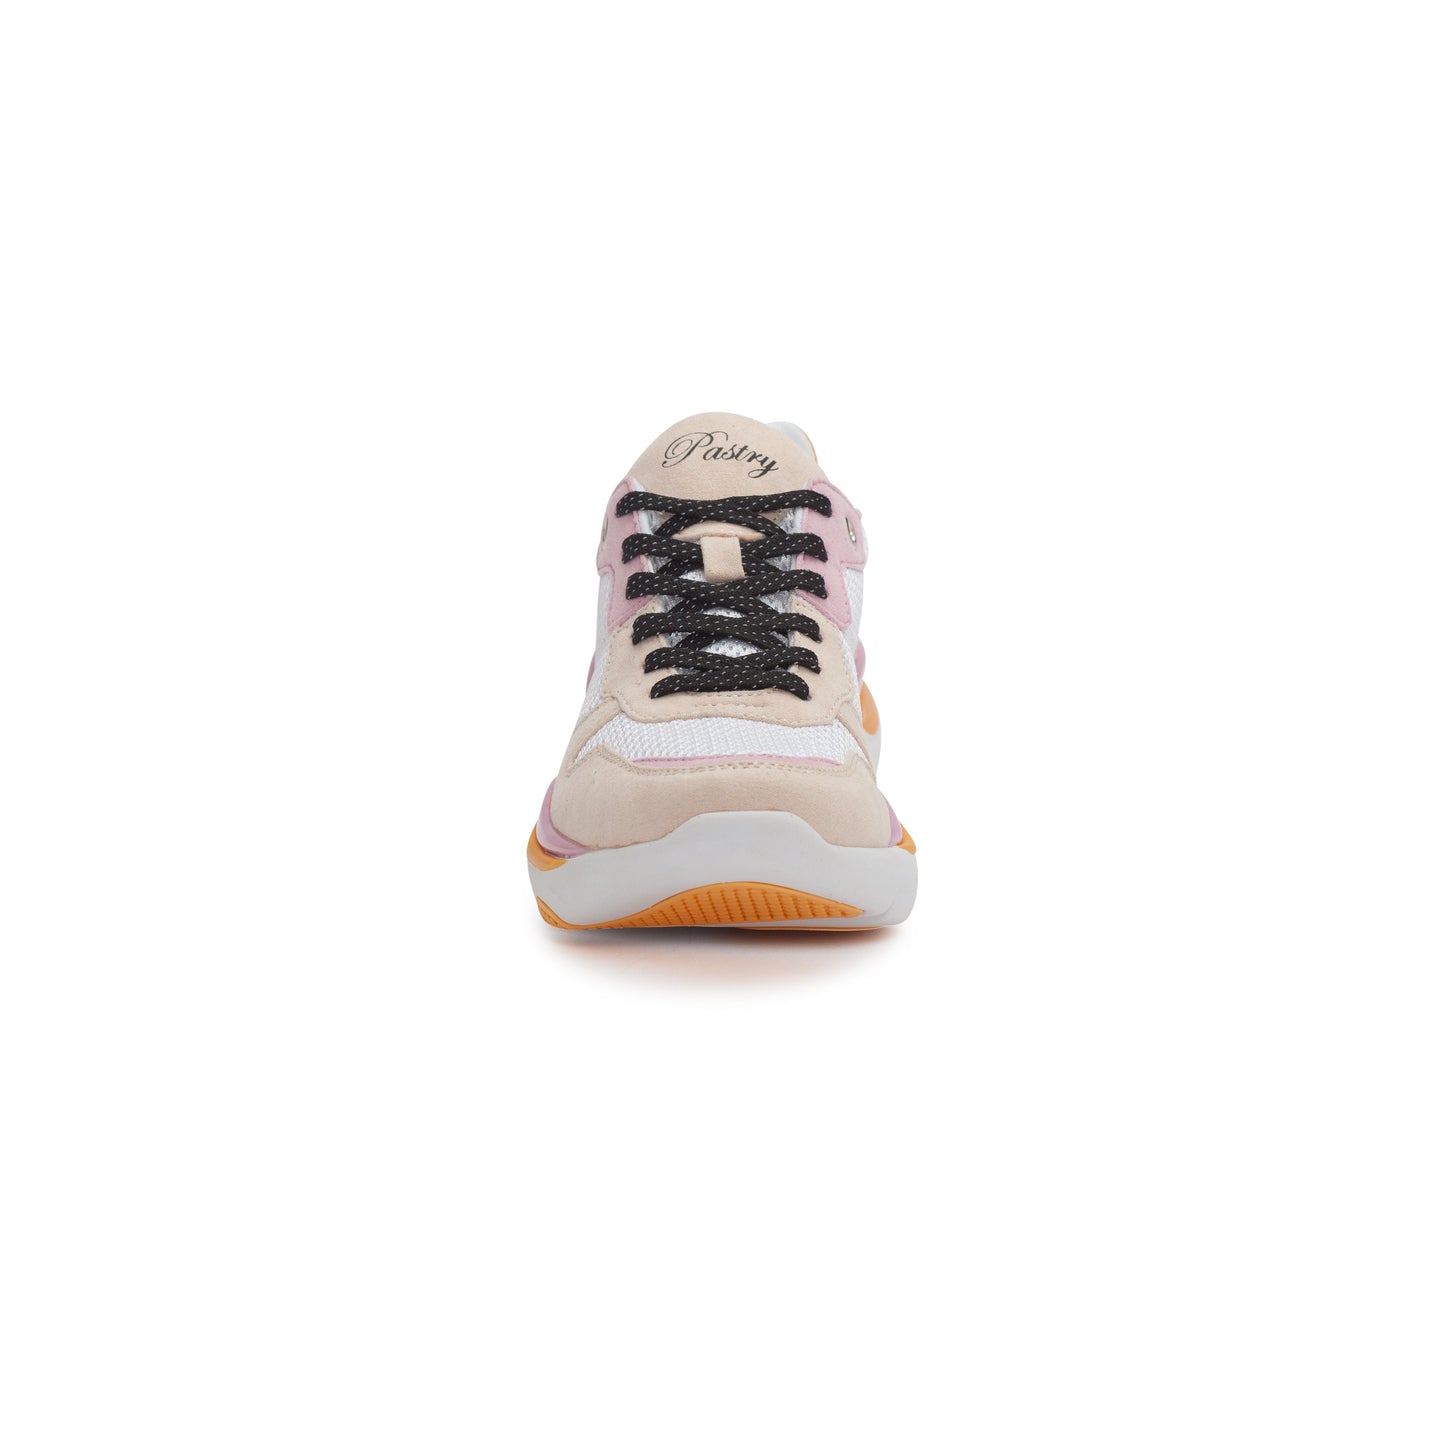 Pastry Adult Women's Carla Sneaker in White/Salmon/Pink front view